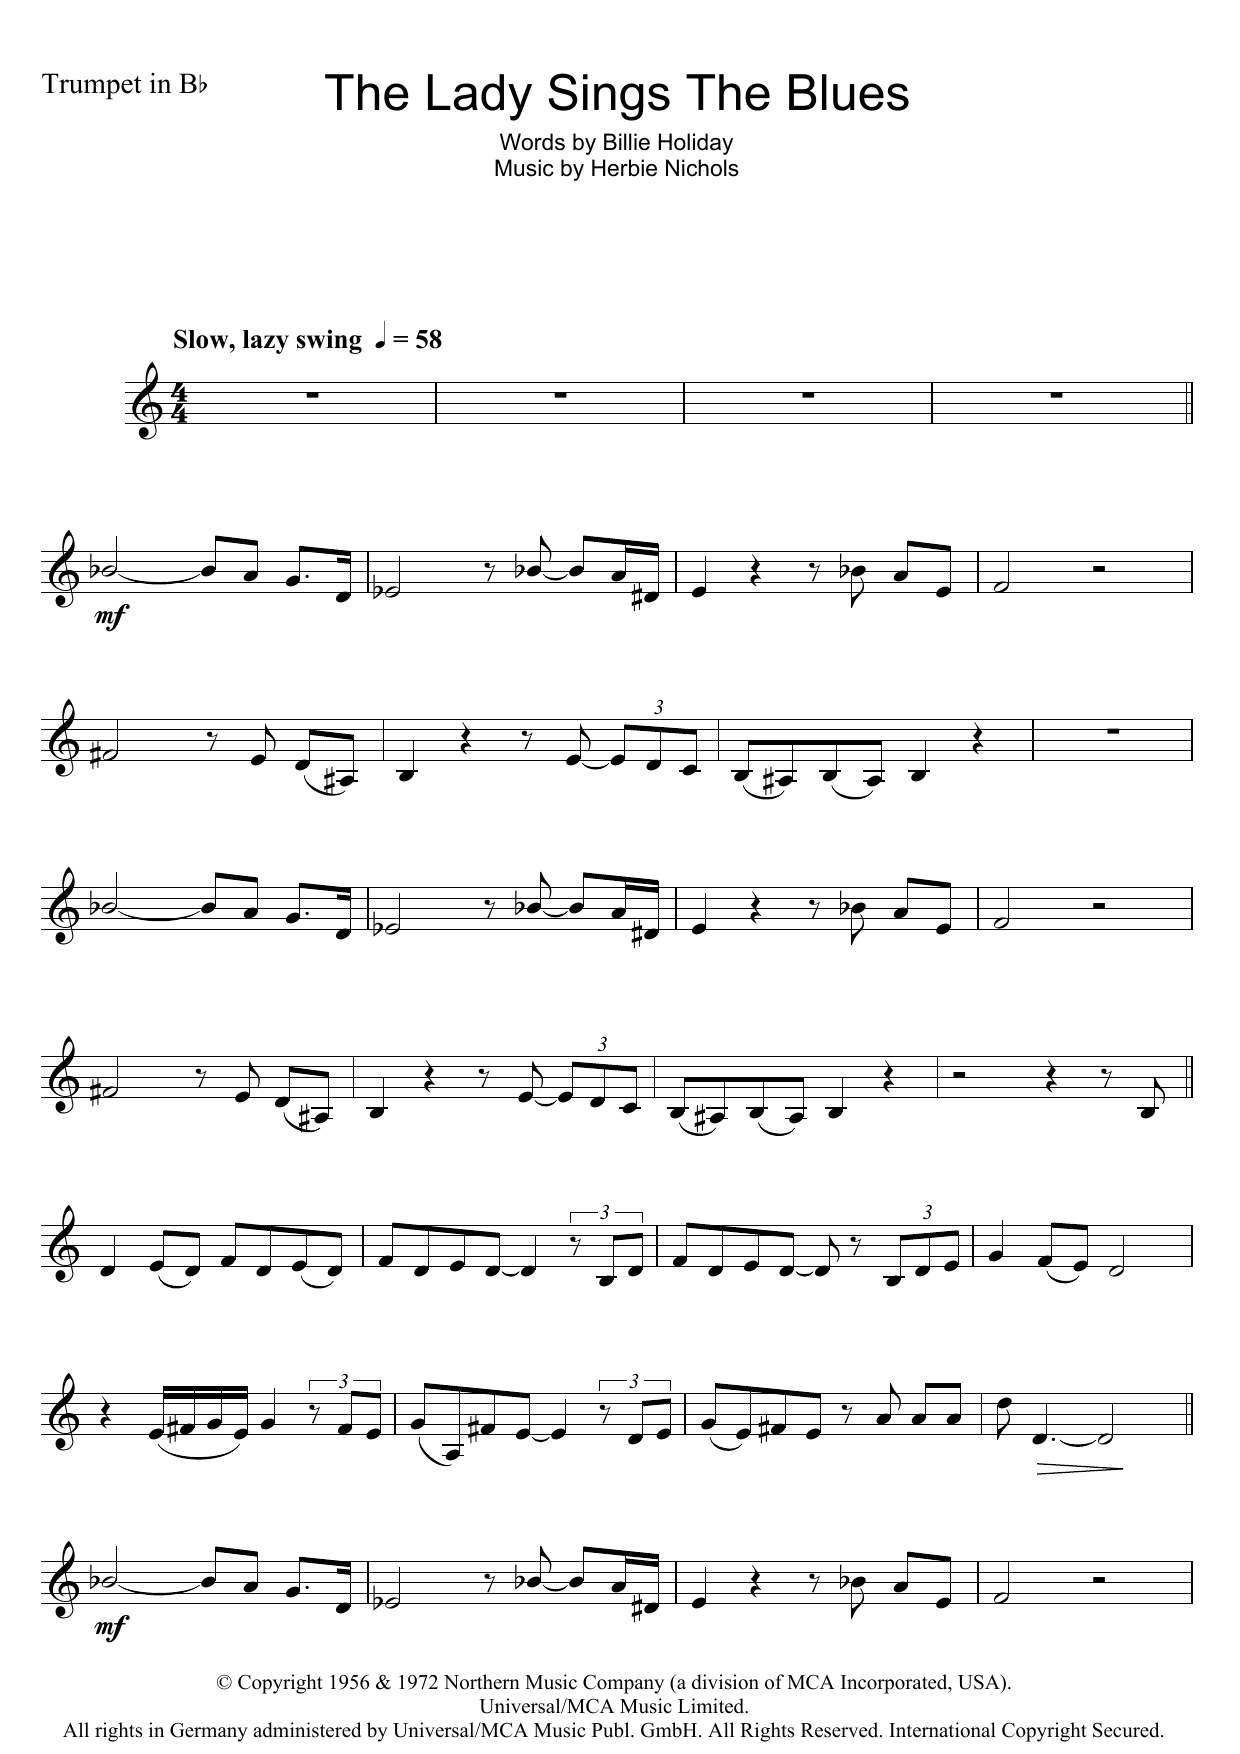 Download Billie Holiday The Lady Sings The Blues Sheet Music